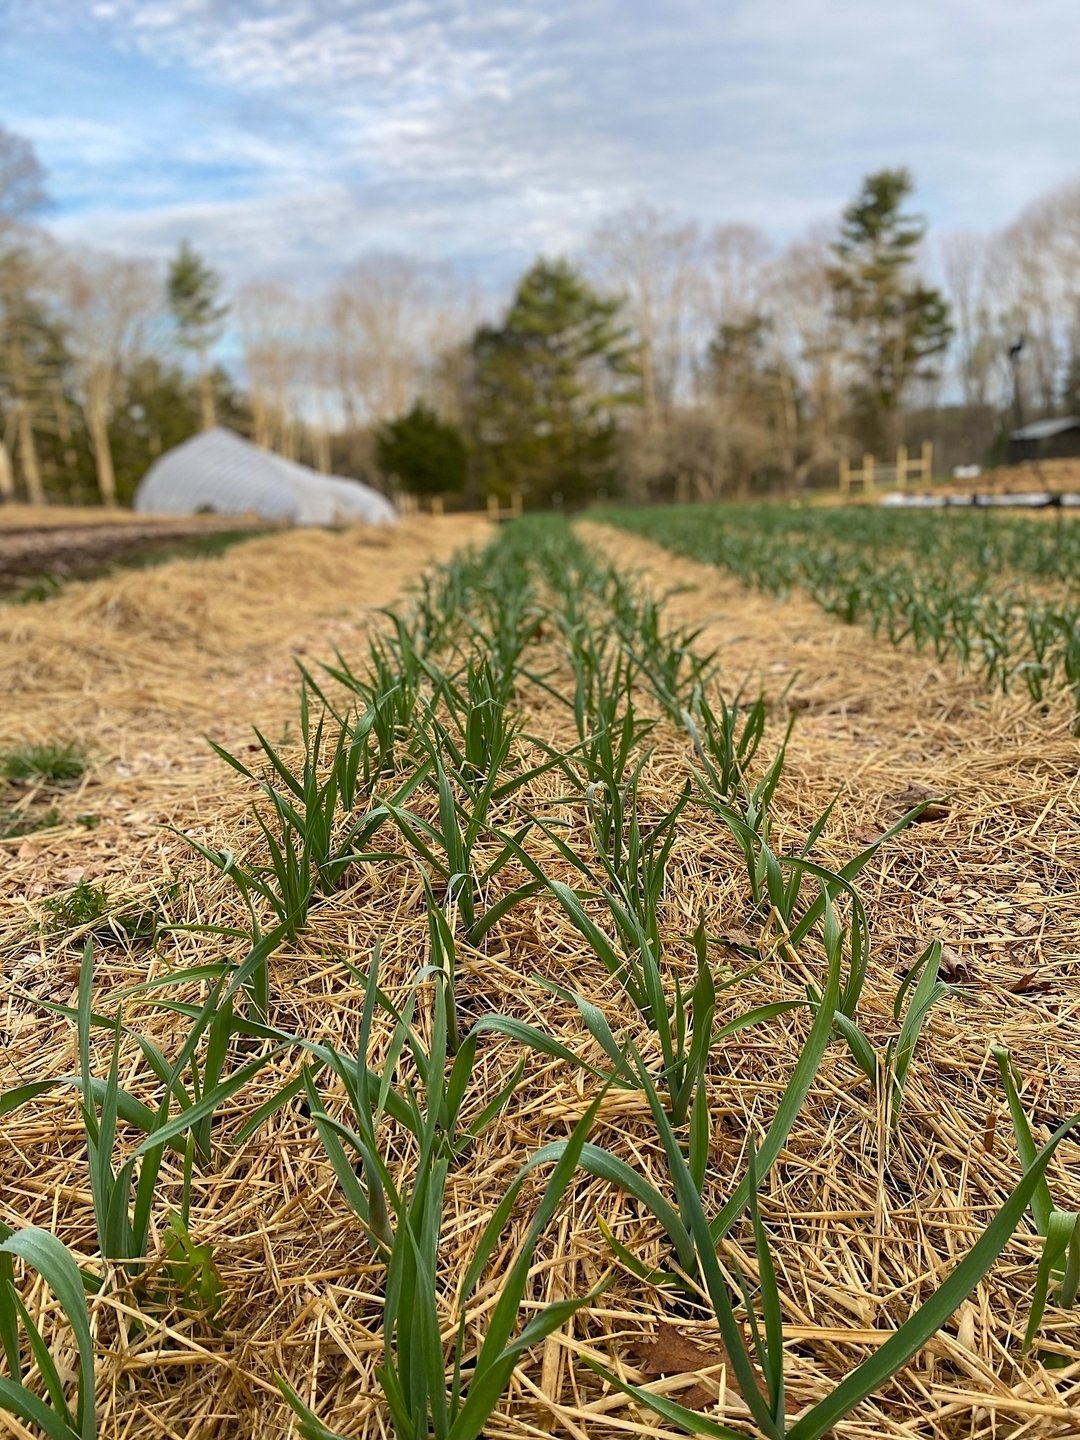 Images from the farm this morning before the rain. From the garlic, seedlings in the greenhouse, cauliflowers, overwintered parsnips, and tulips there is a lot going on on the farm ...